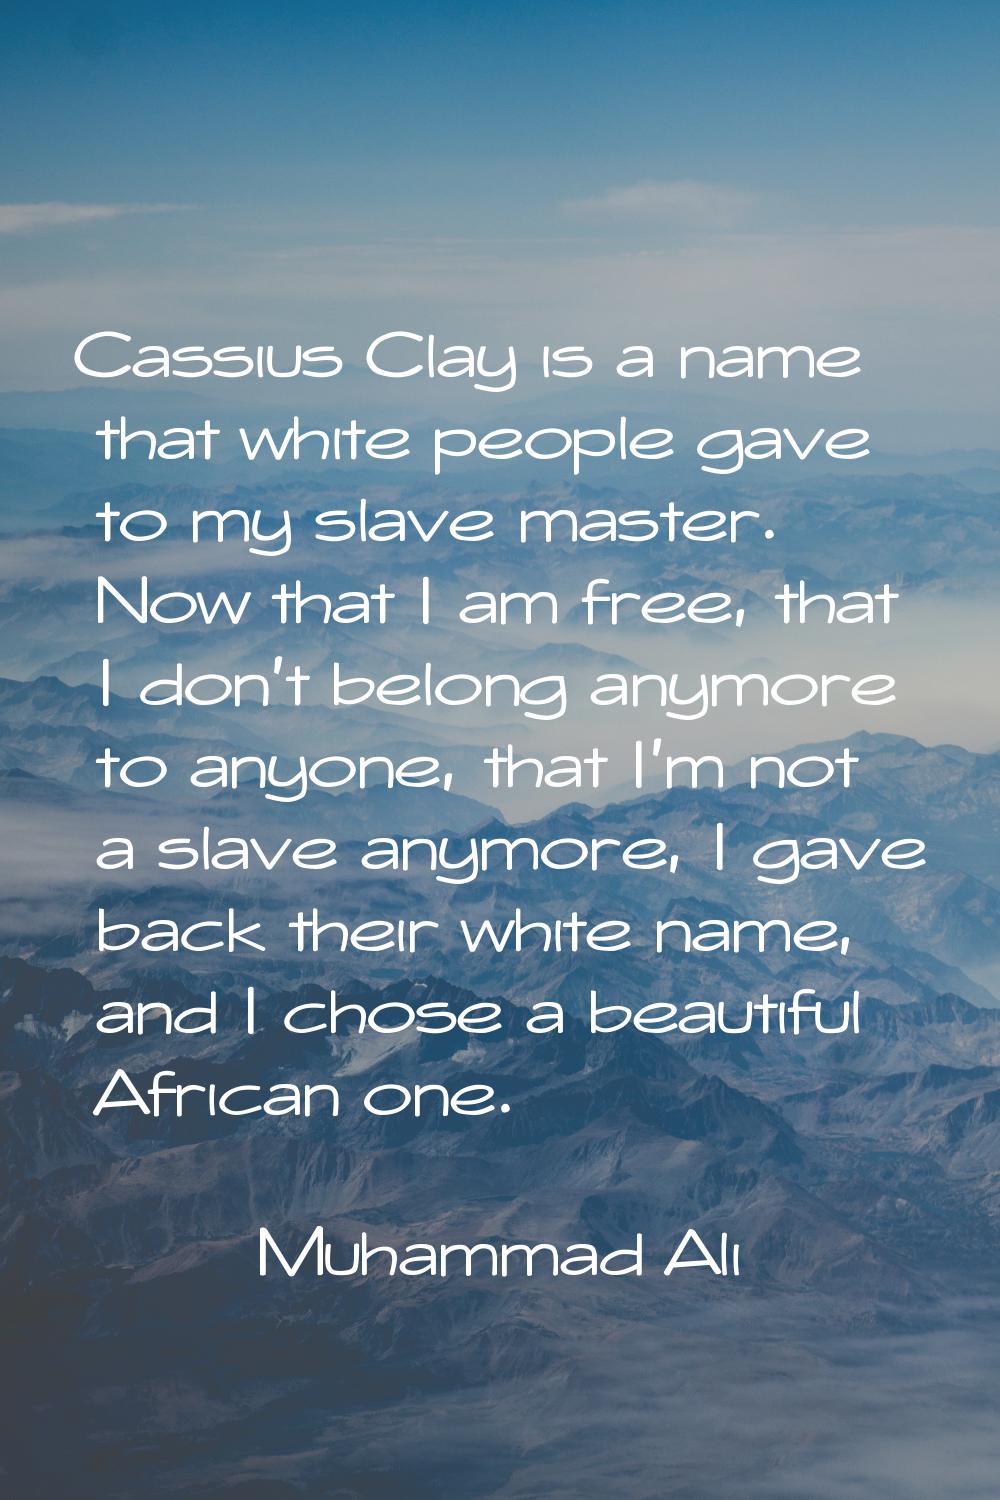 Cassius Clay is a name that white people gave to my slave master. Now that I am free, that I don't 